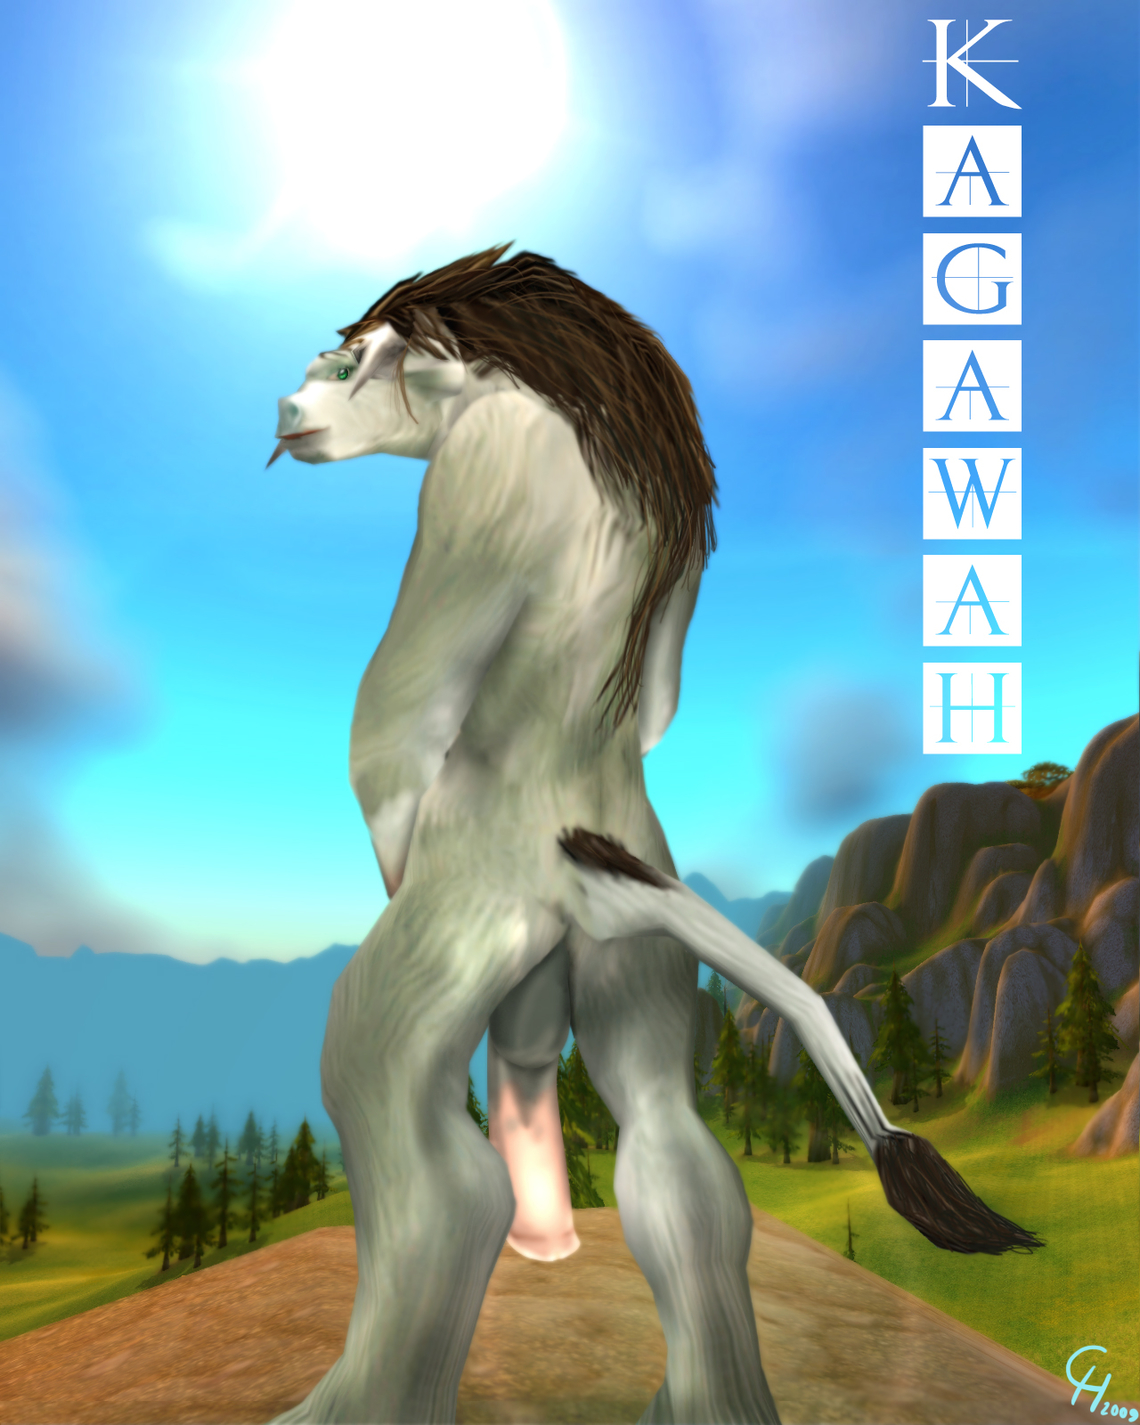 First Glance on Kagawah [Tauren/Male-Pinup]
Very first picture of Kagawah from 2009.
Keywords: Tauren;OC;Male Pinup